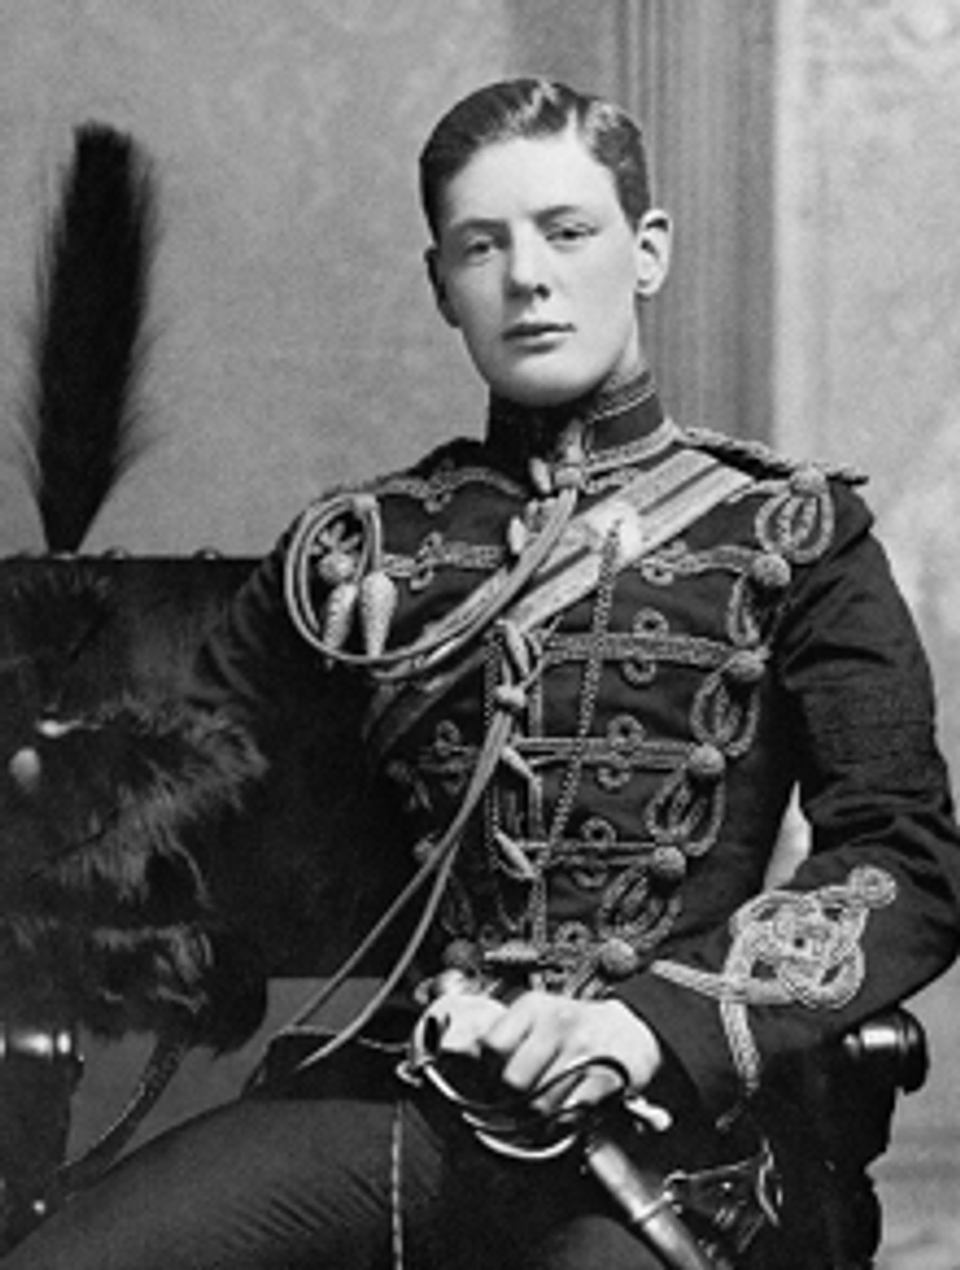 Young Winston Churchill posing in his military dress uniform.